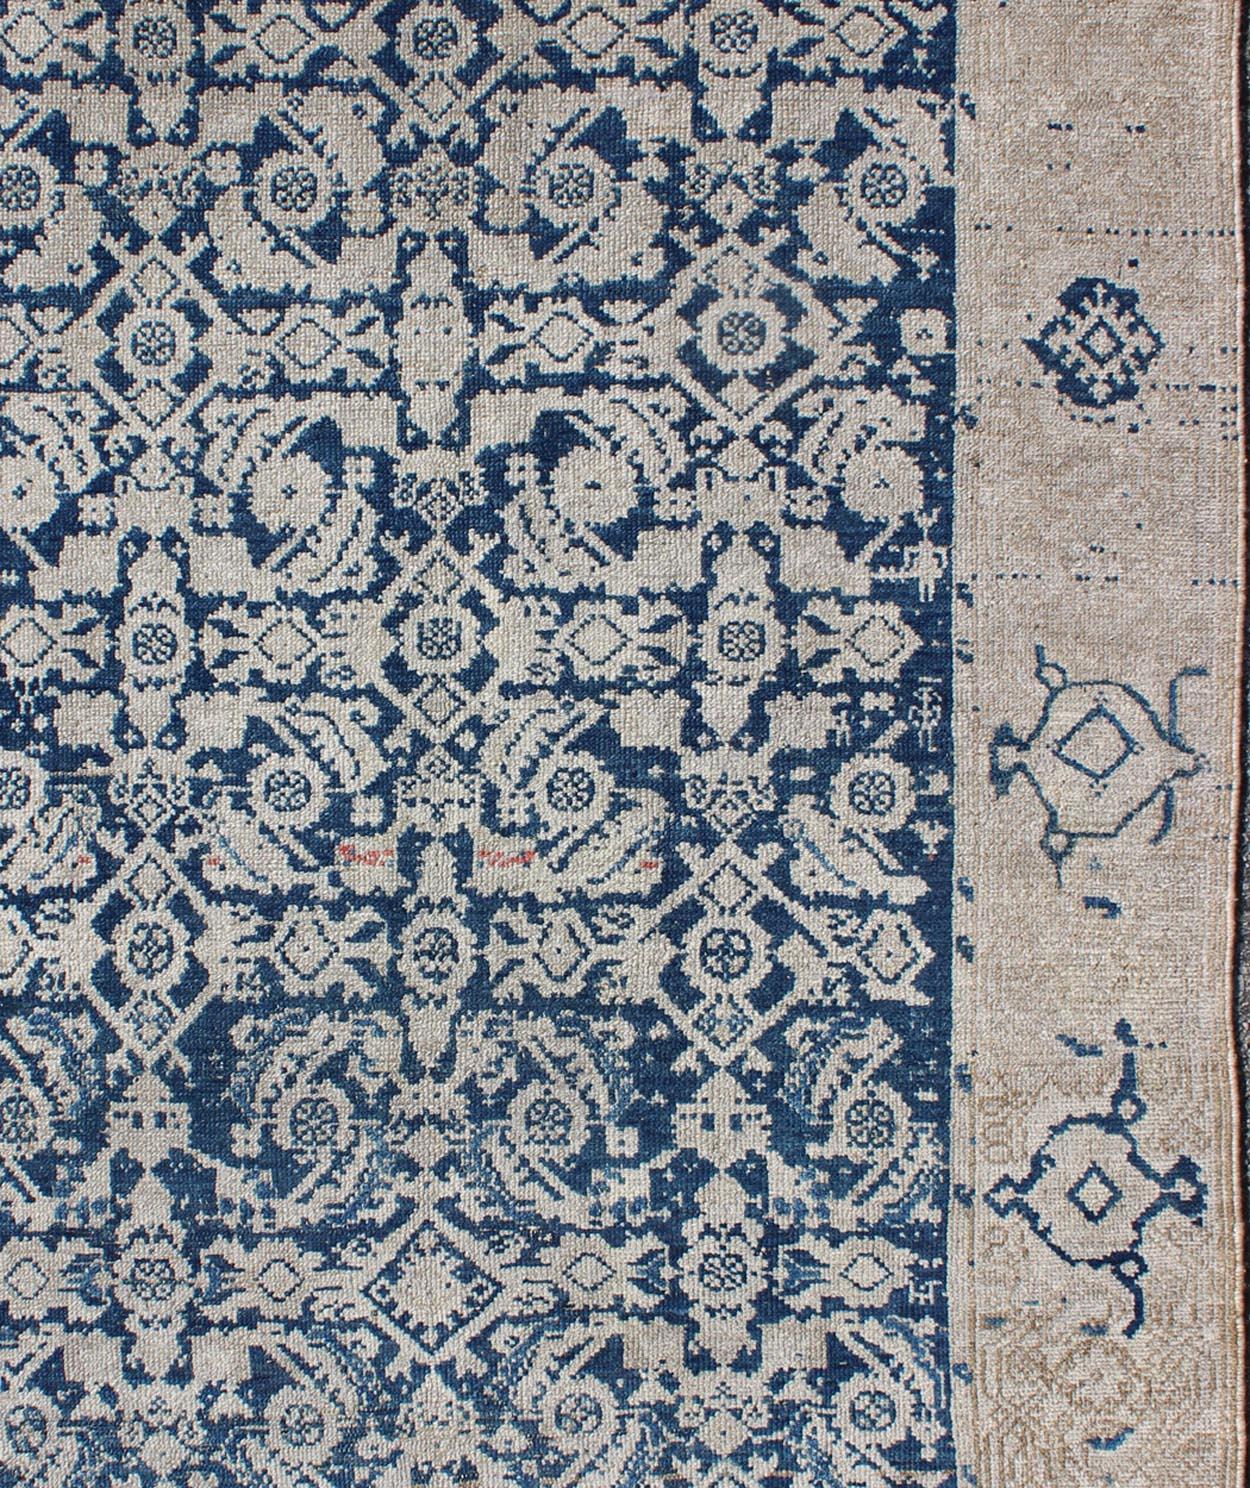 All-over blue geometric Herati design Persian antique Malayer distressed rug in navy blue and earthy tones. Antique Persian rug in navy tones with geometric motifs, rug EN-165849, country of origin / type: Iran / Malayer, circa 1920.

This Persian